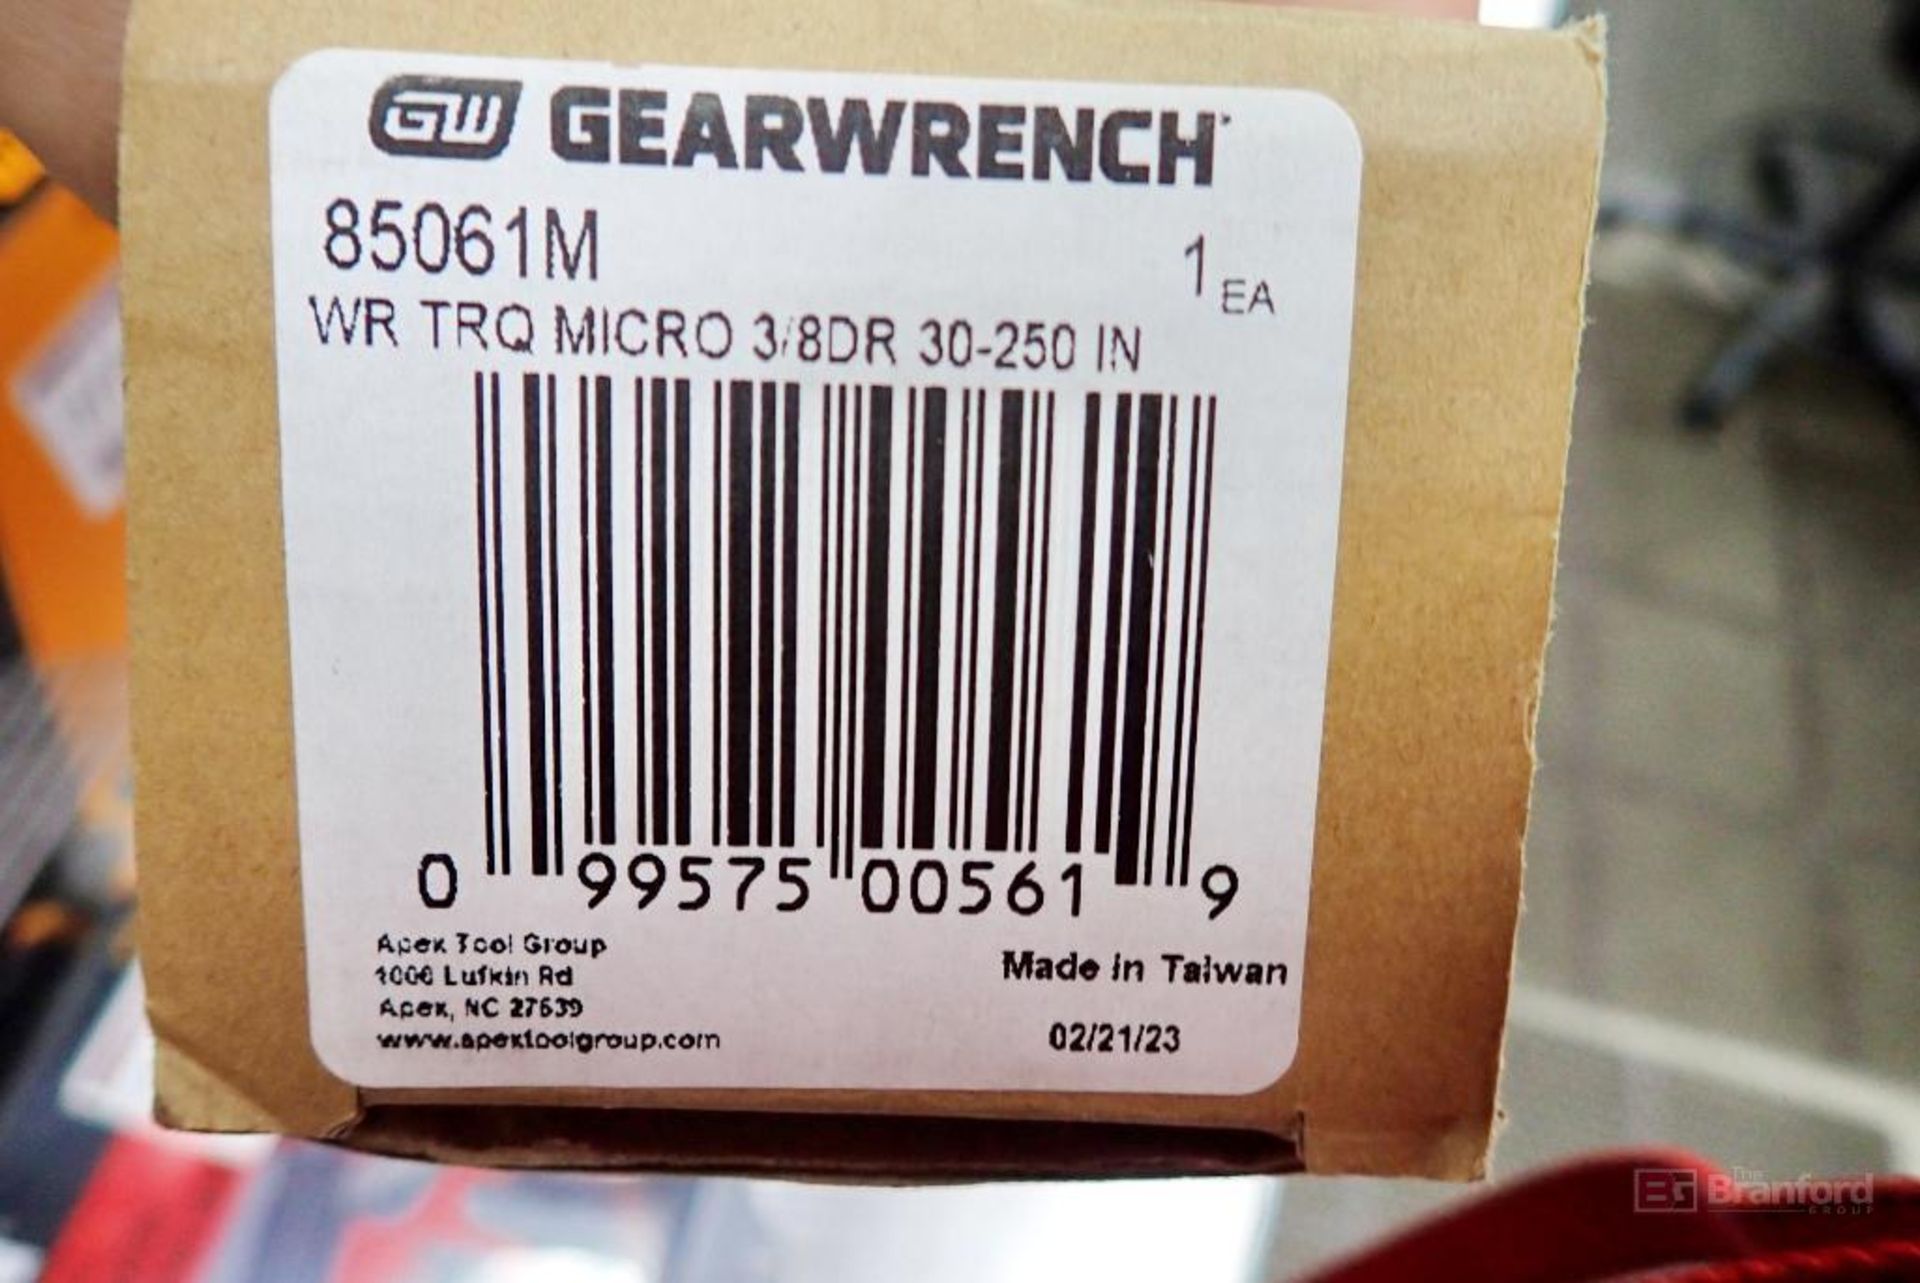 GearWrench 85061M Micrometer Torque Wrench - Image 5 of 5